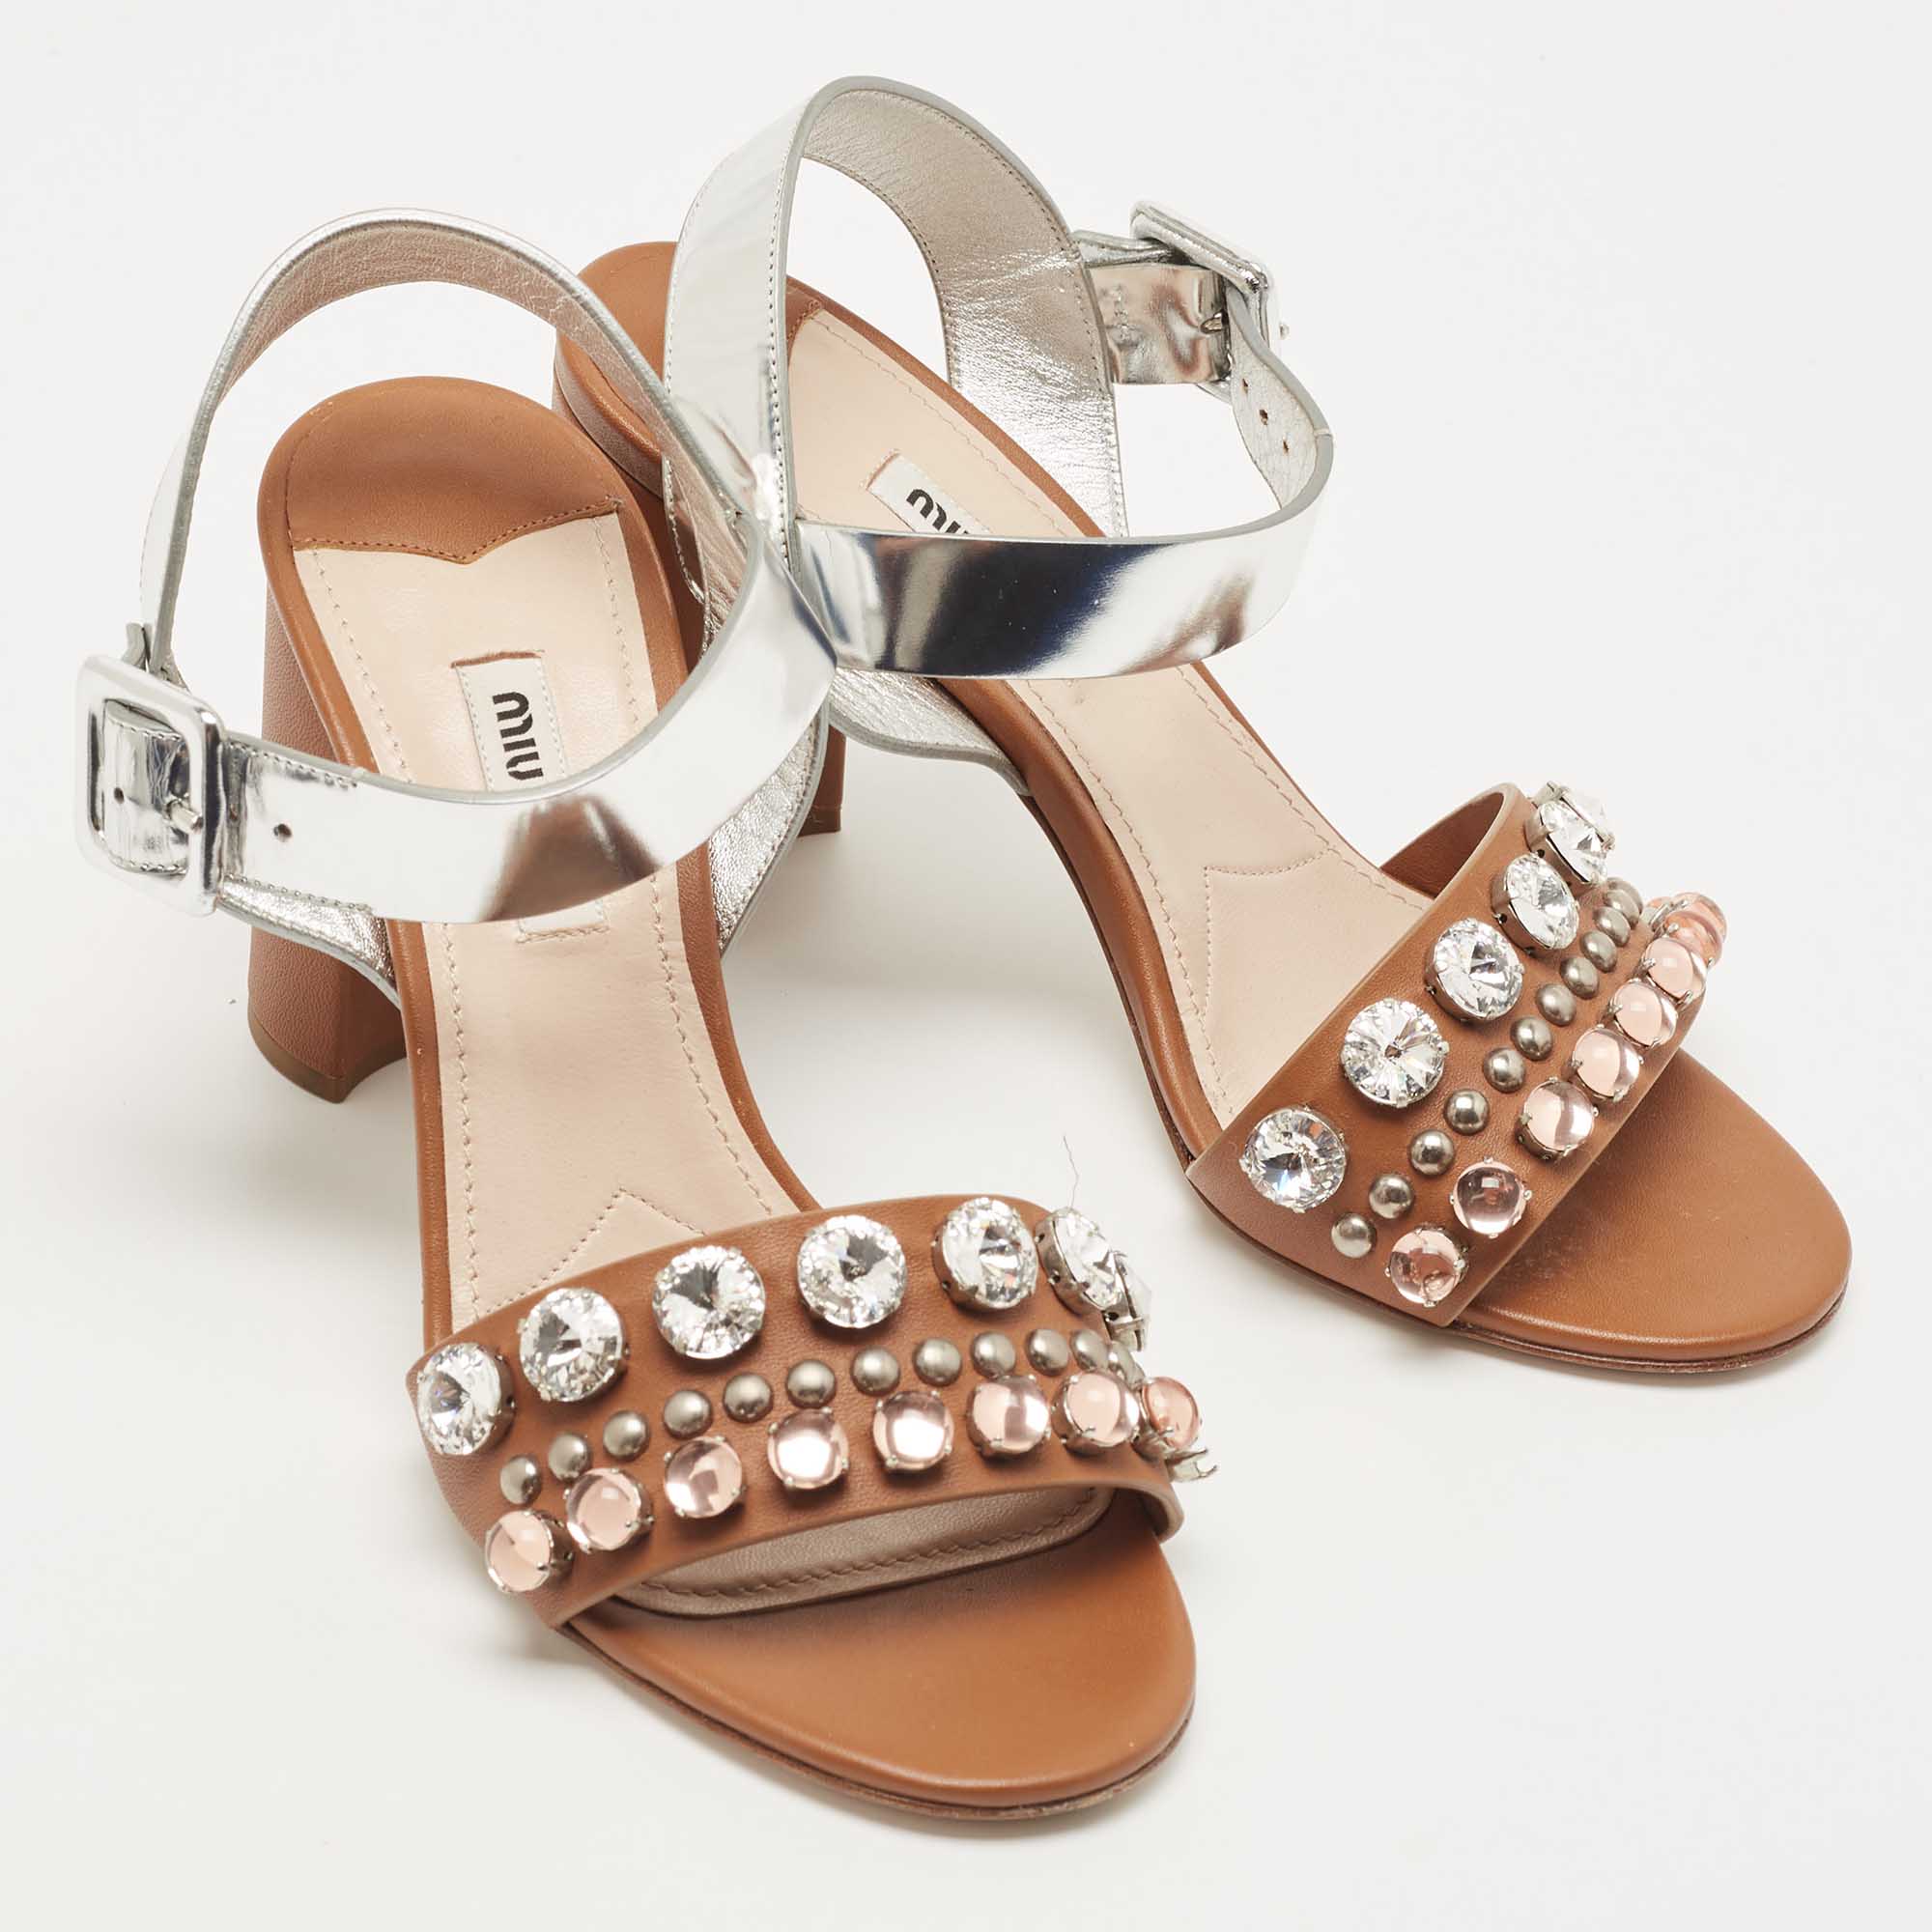 Miu Miu Brown/Silver Leather Crystal Embellished Ankle Strap Sandals Size 37